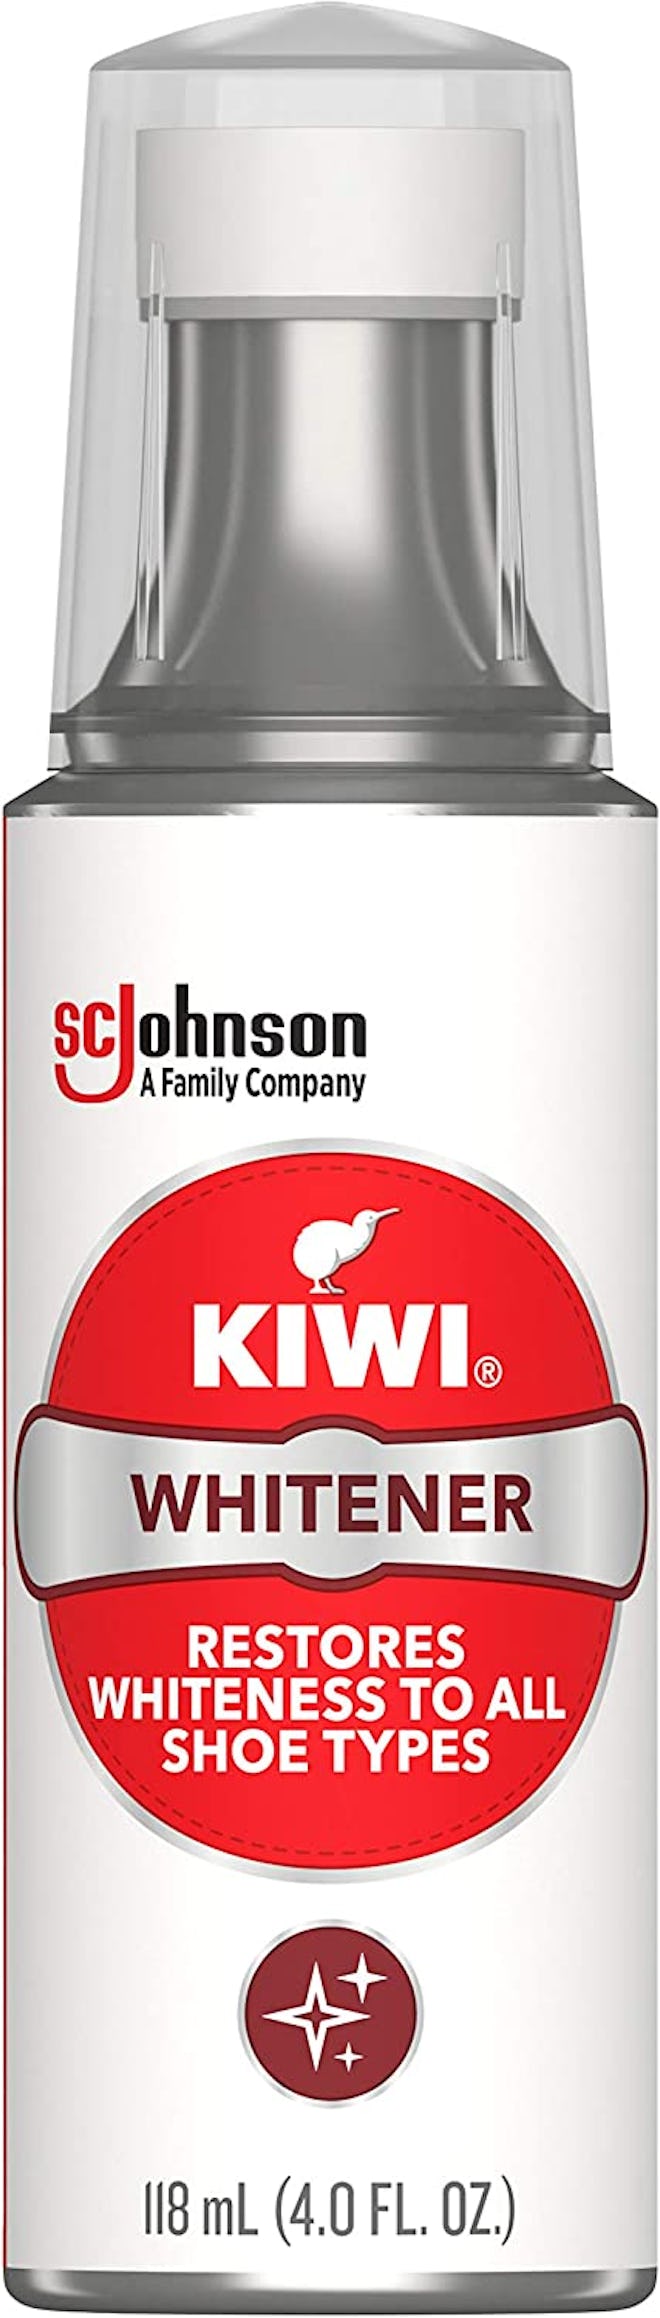 can of shoe whitener from kiwi